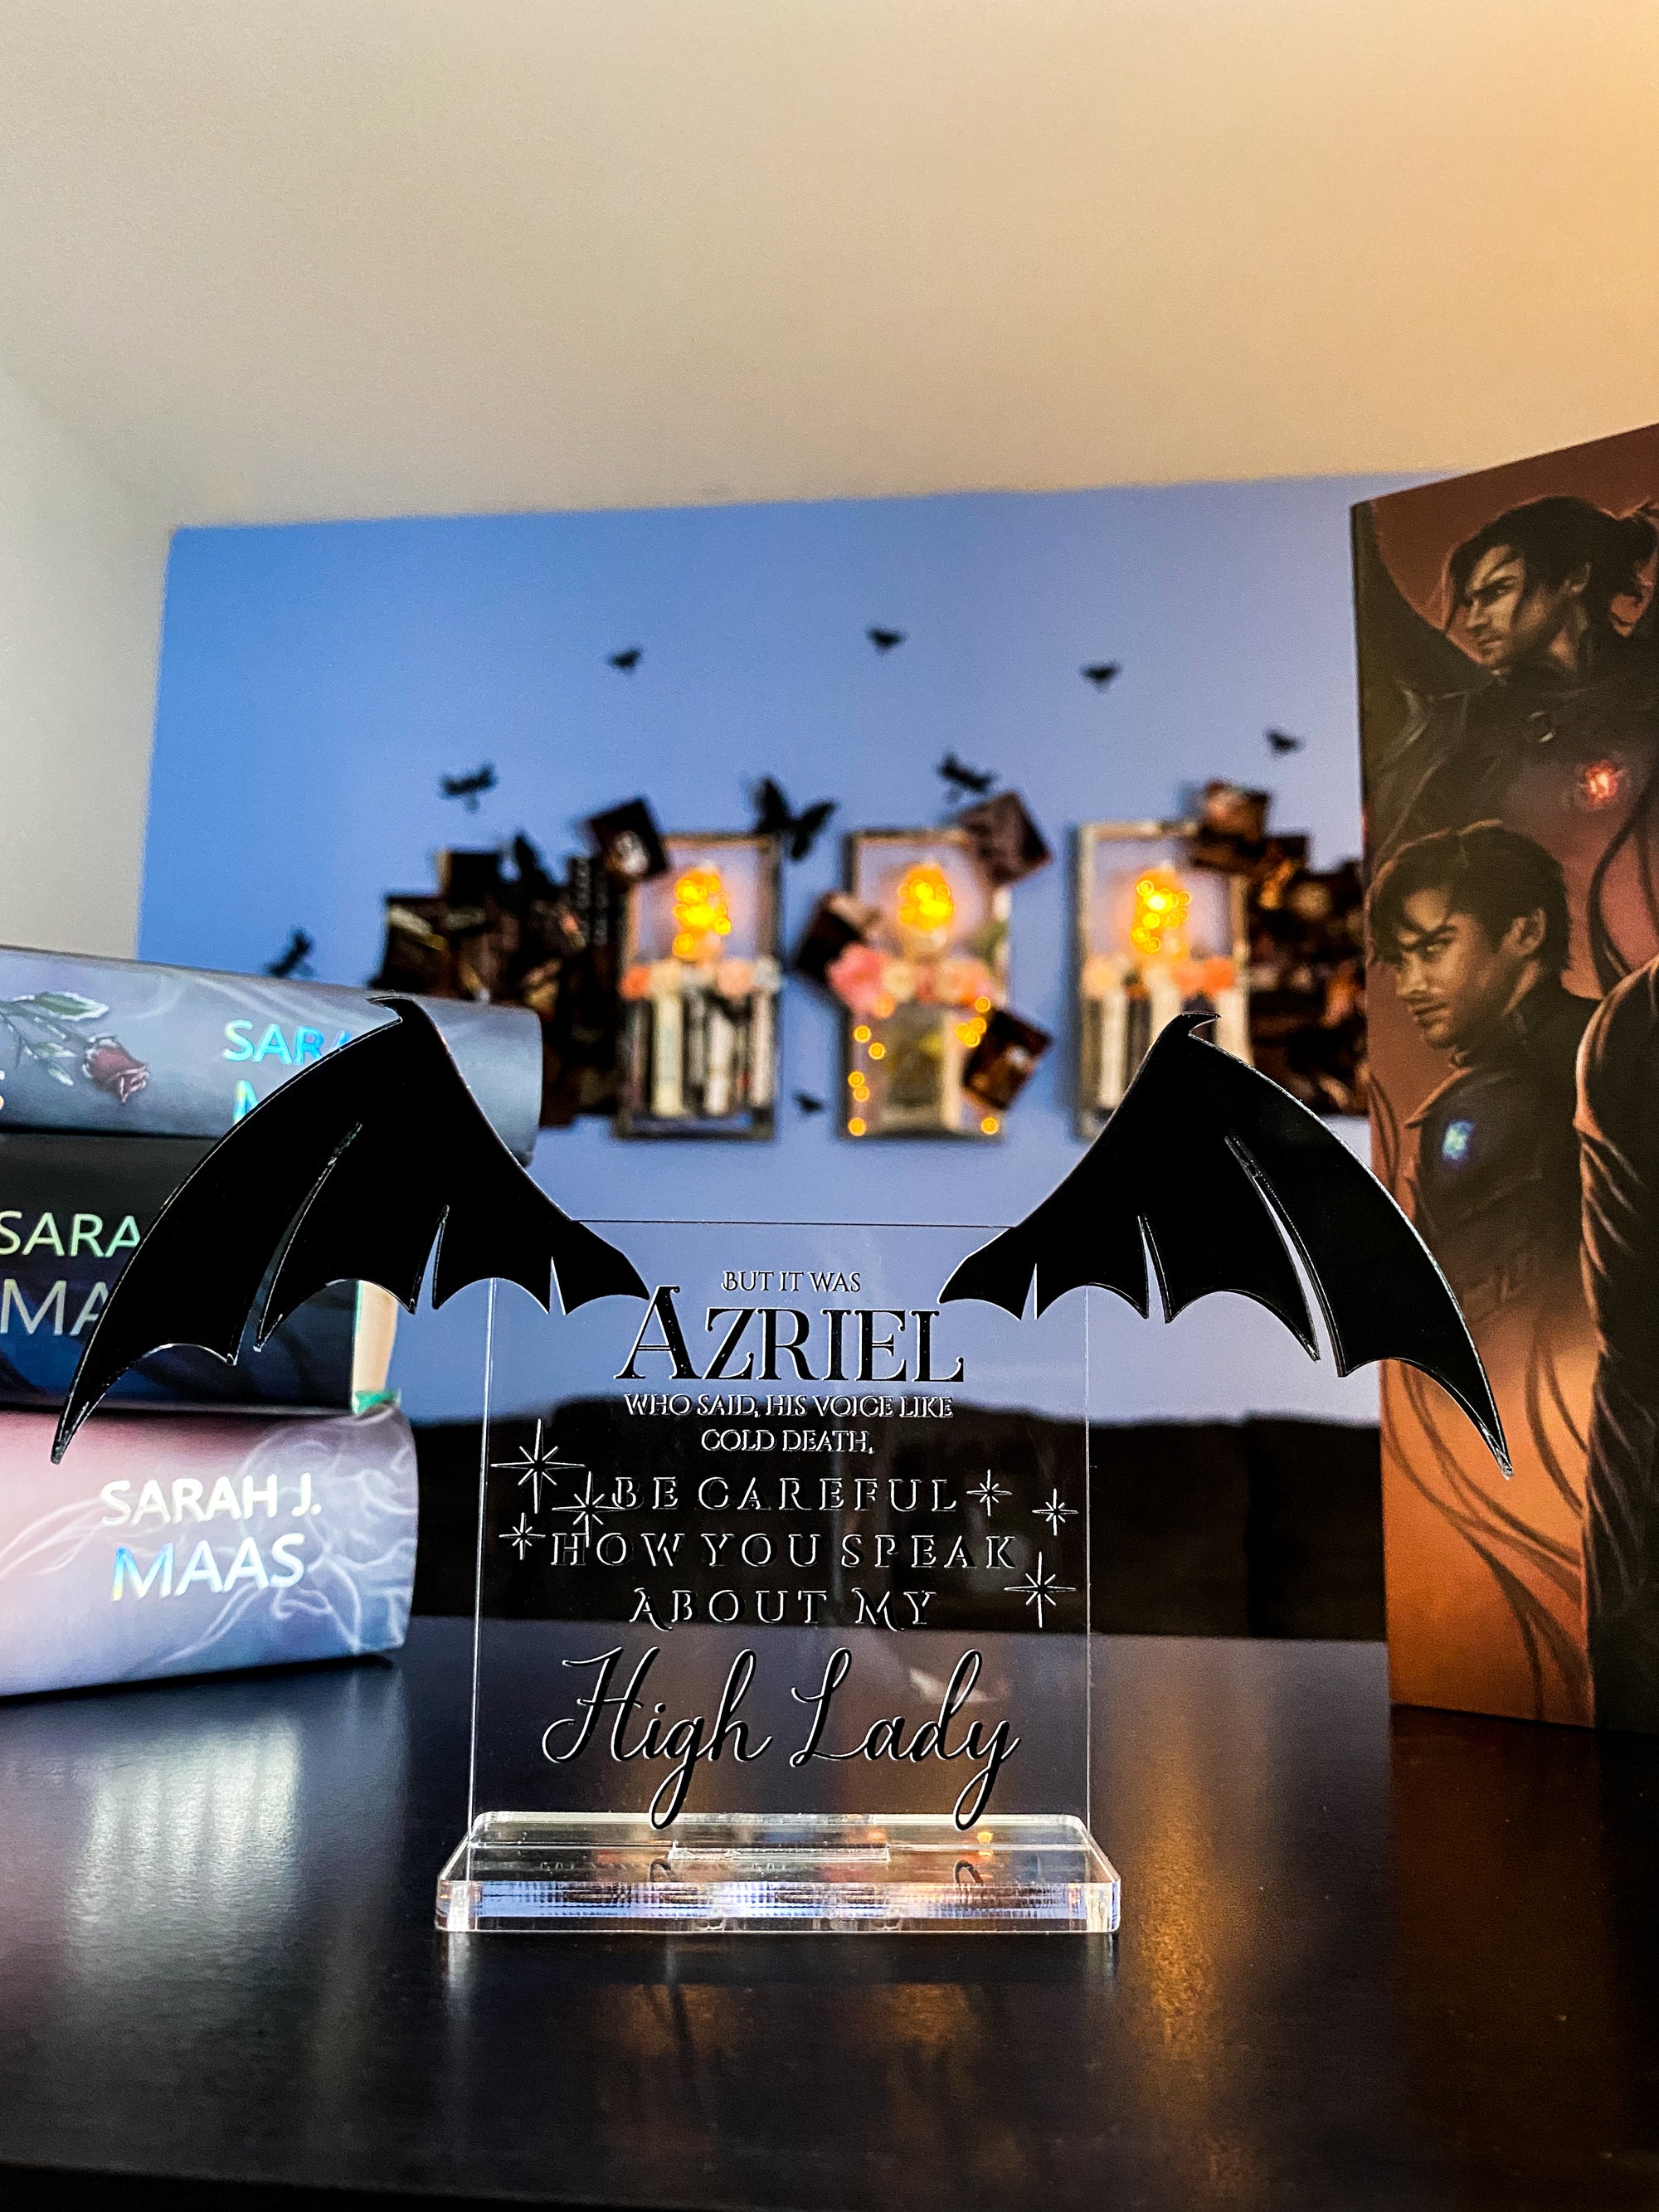 Azriel - A Court of Thorns and Roses Series / A Court of Wings and Ruin - Freestanding Bookshelf / Desktop Acrylic Accessory - Officially licensed by Sarah J. Maas - D9